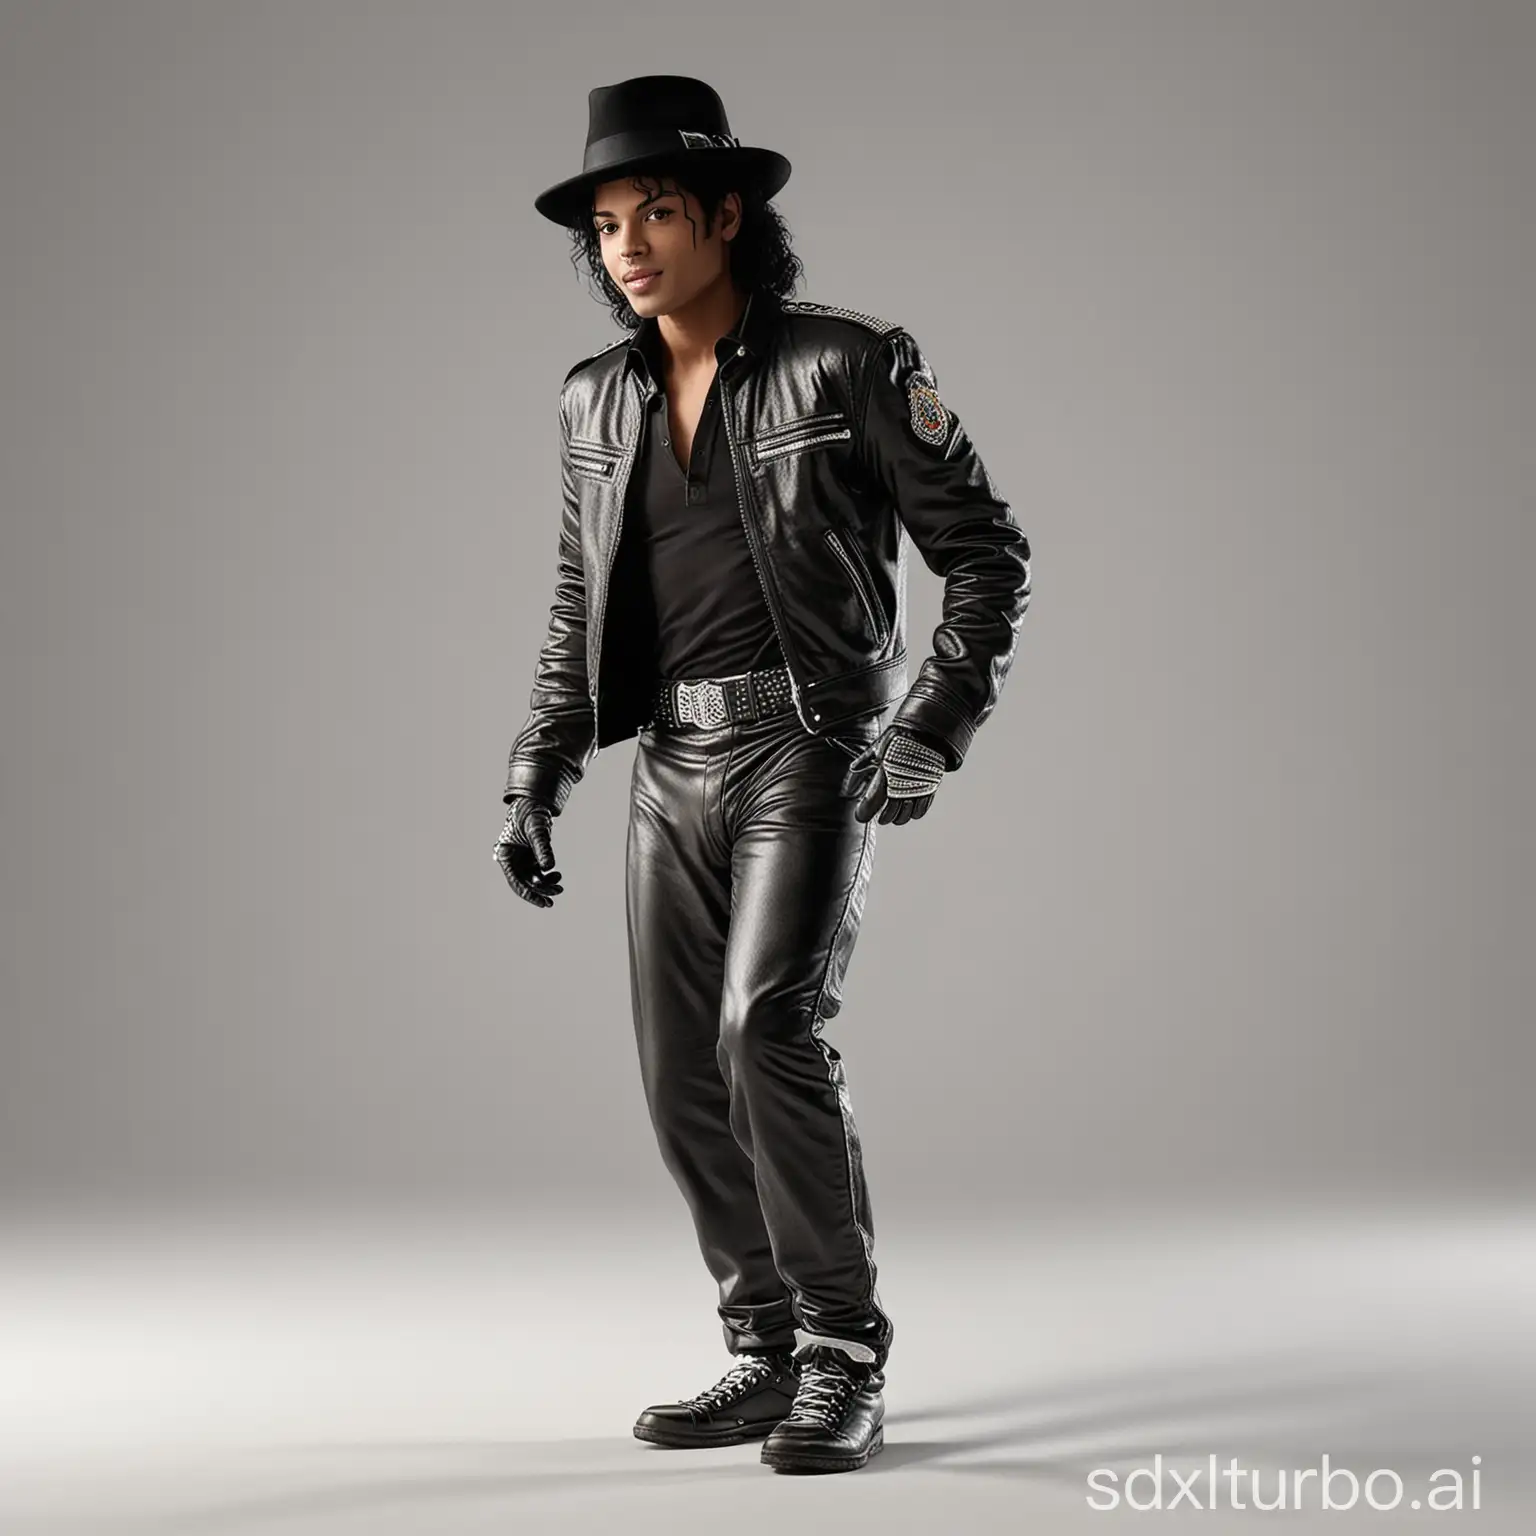 On a plain bacground is a Michael Jackson is doing a moonwalk. This is a full body photo realistic high resolution image with sharp clean subject focus